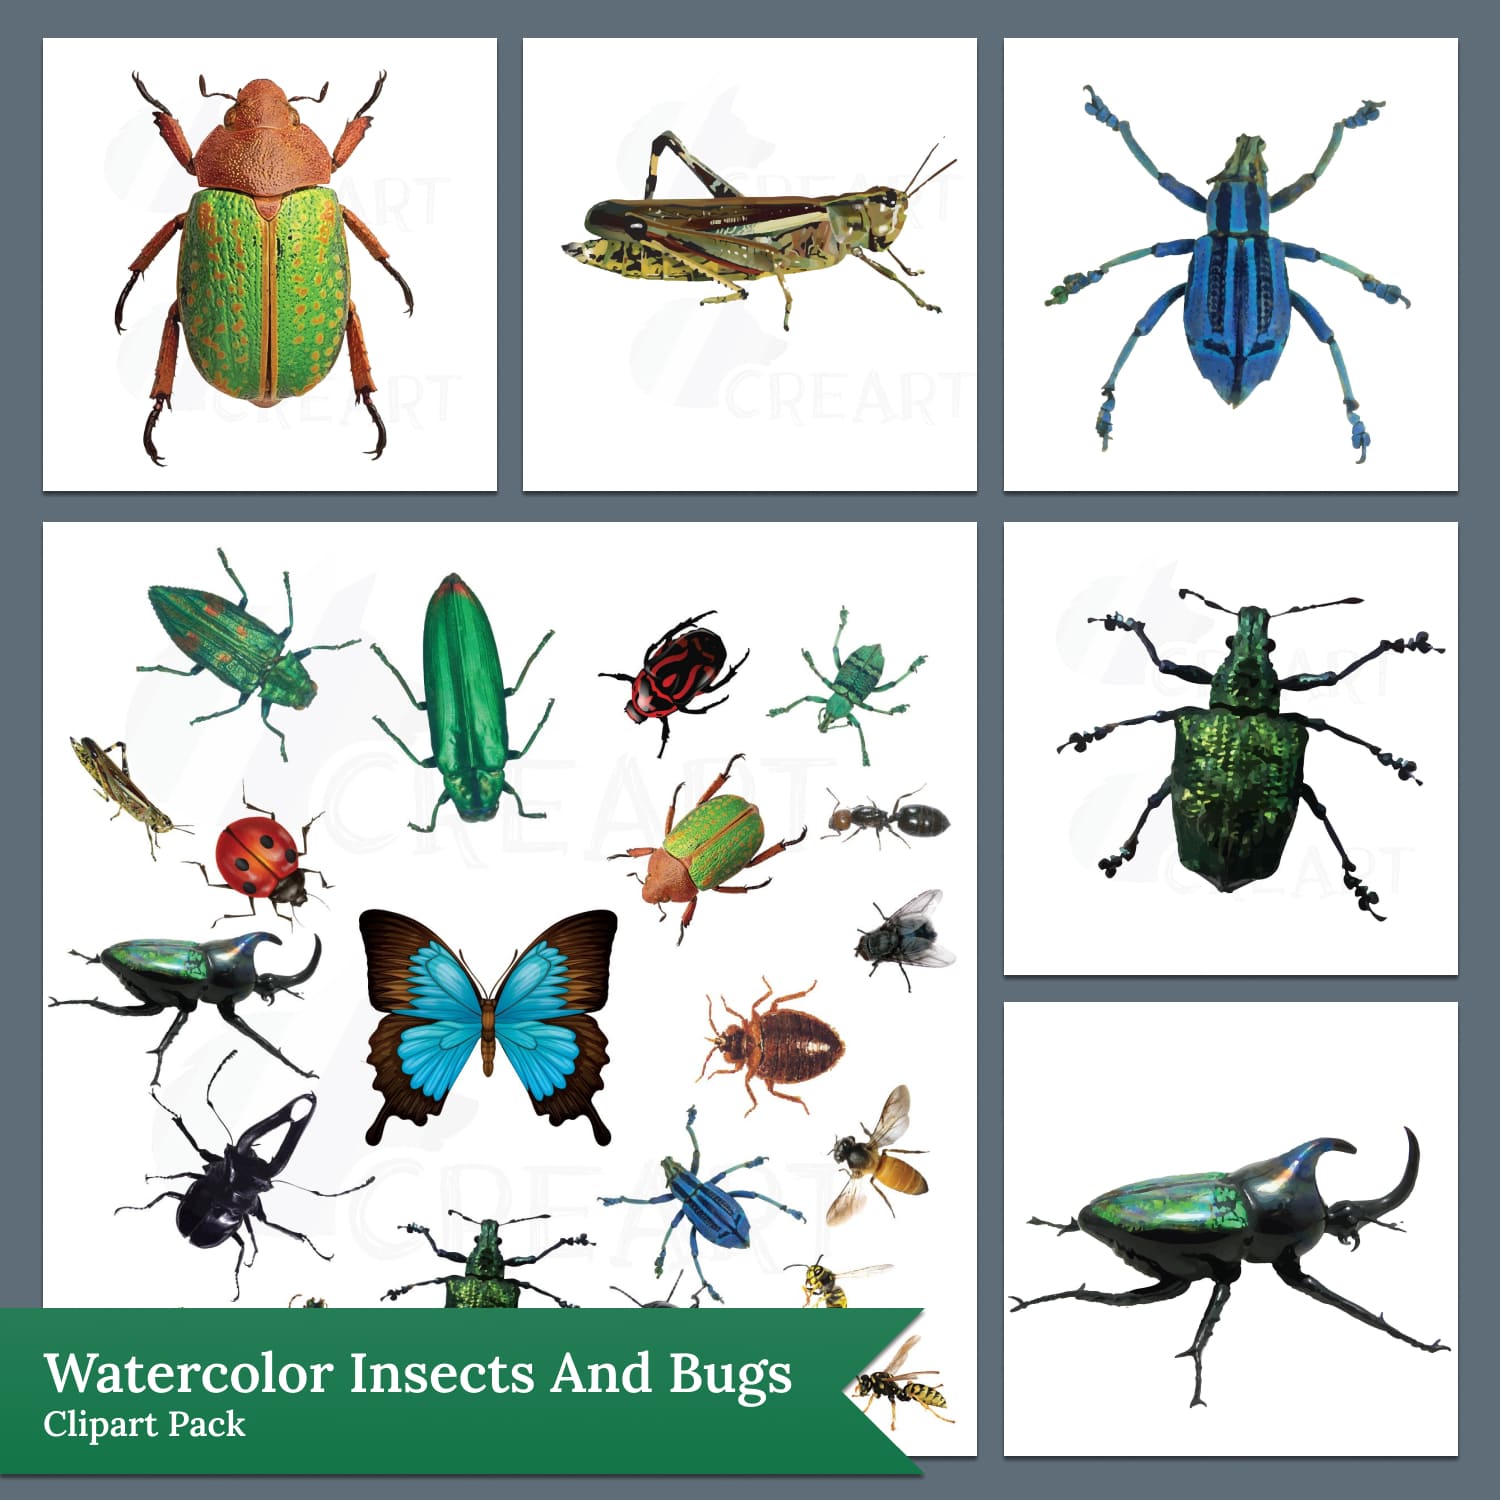 Watercolor insects and bugs clipart pack.